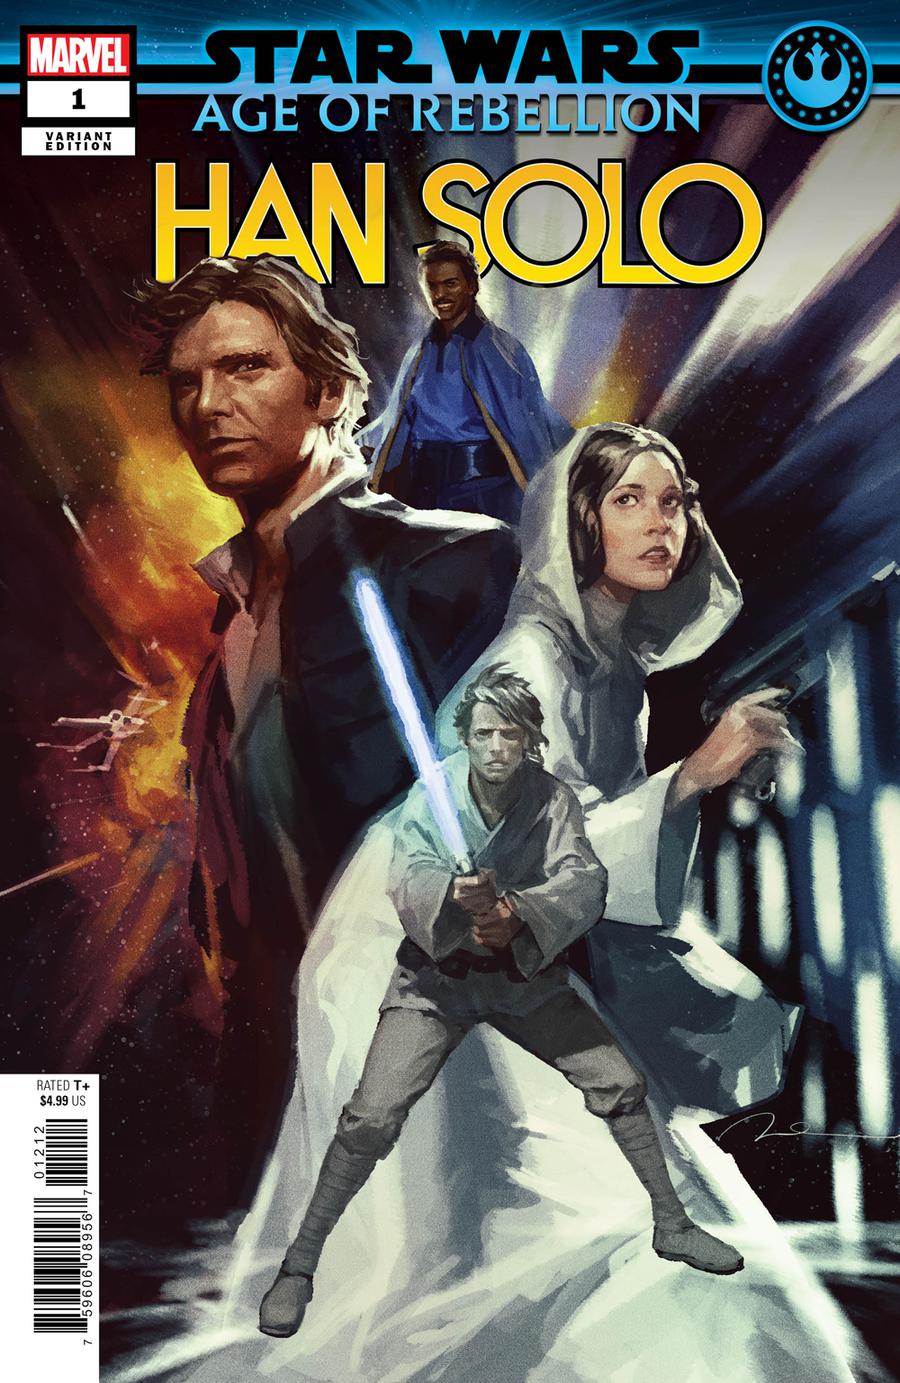 Star Wars Age of Rebellion Han Solo #1 Main Cover STOCK PHOTO Marvel 2019 